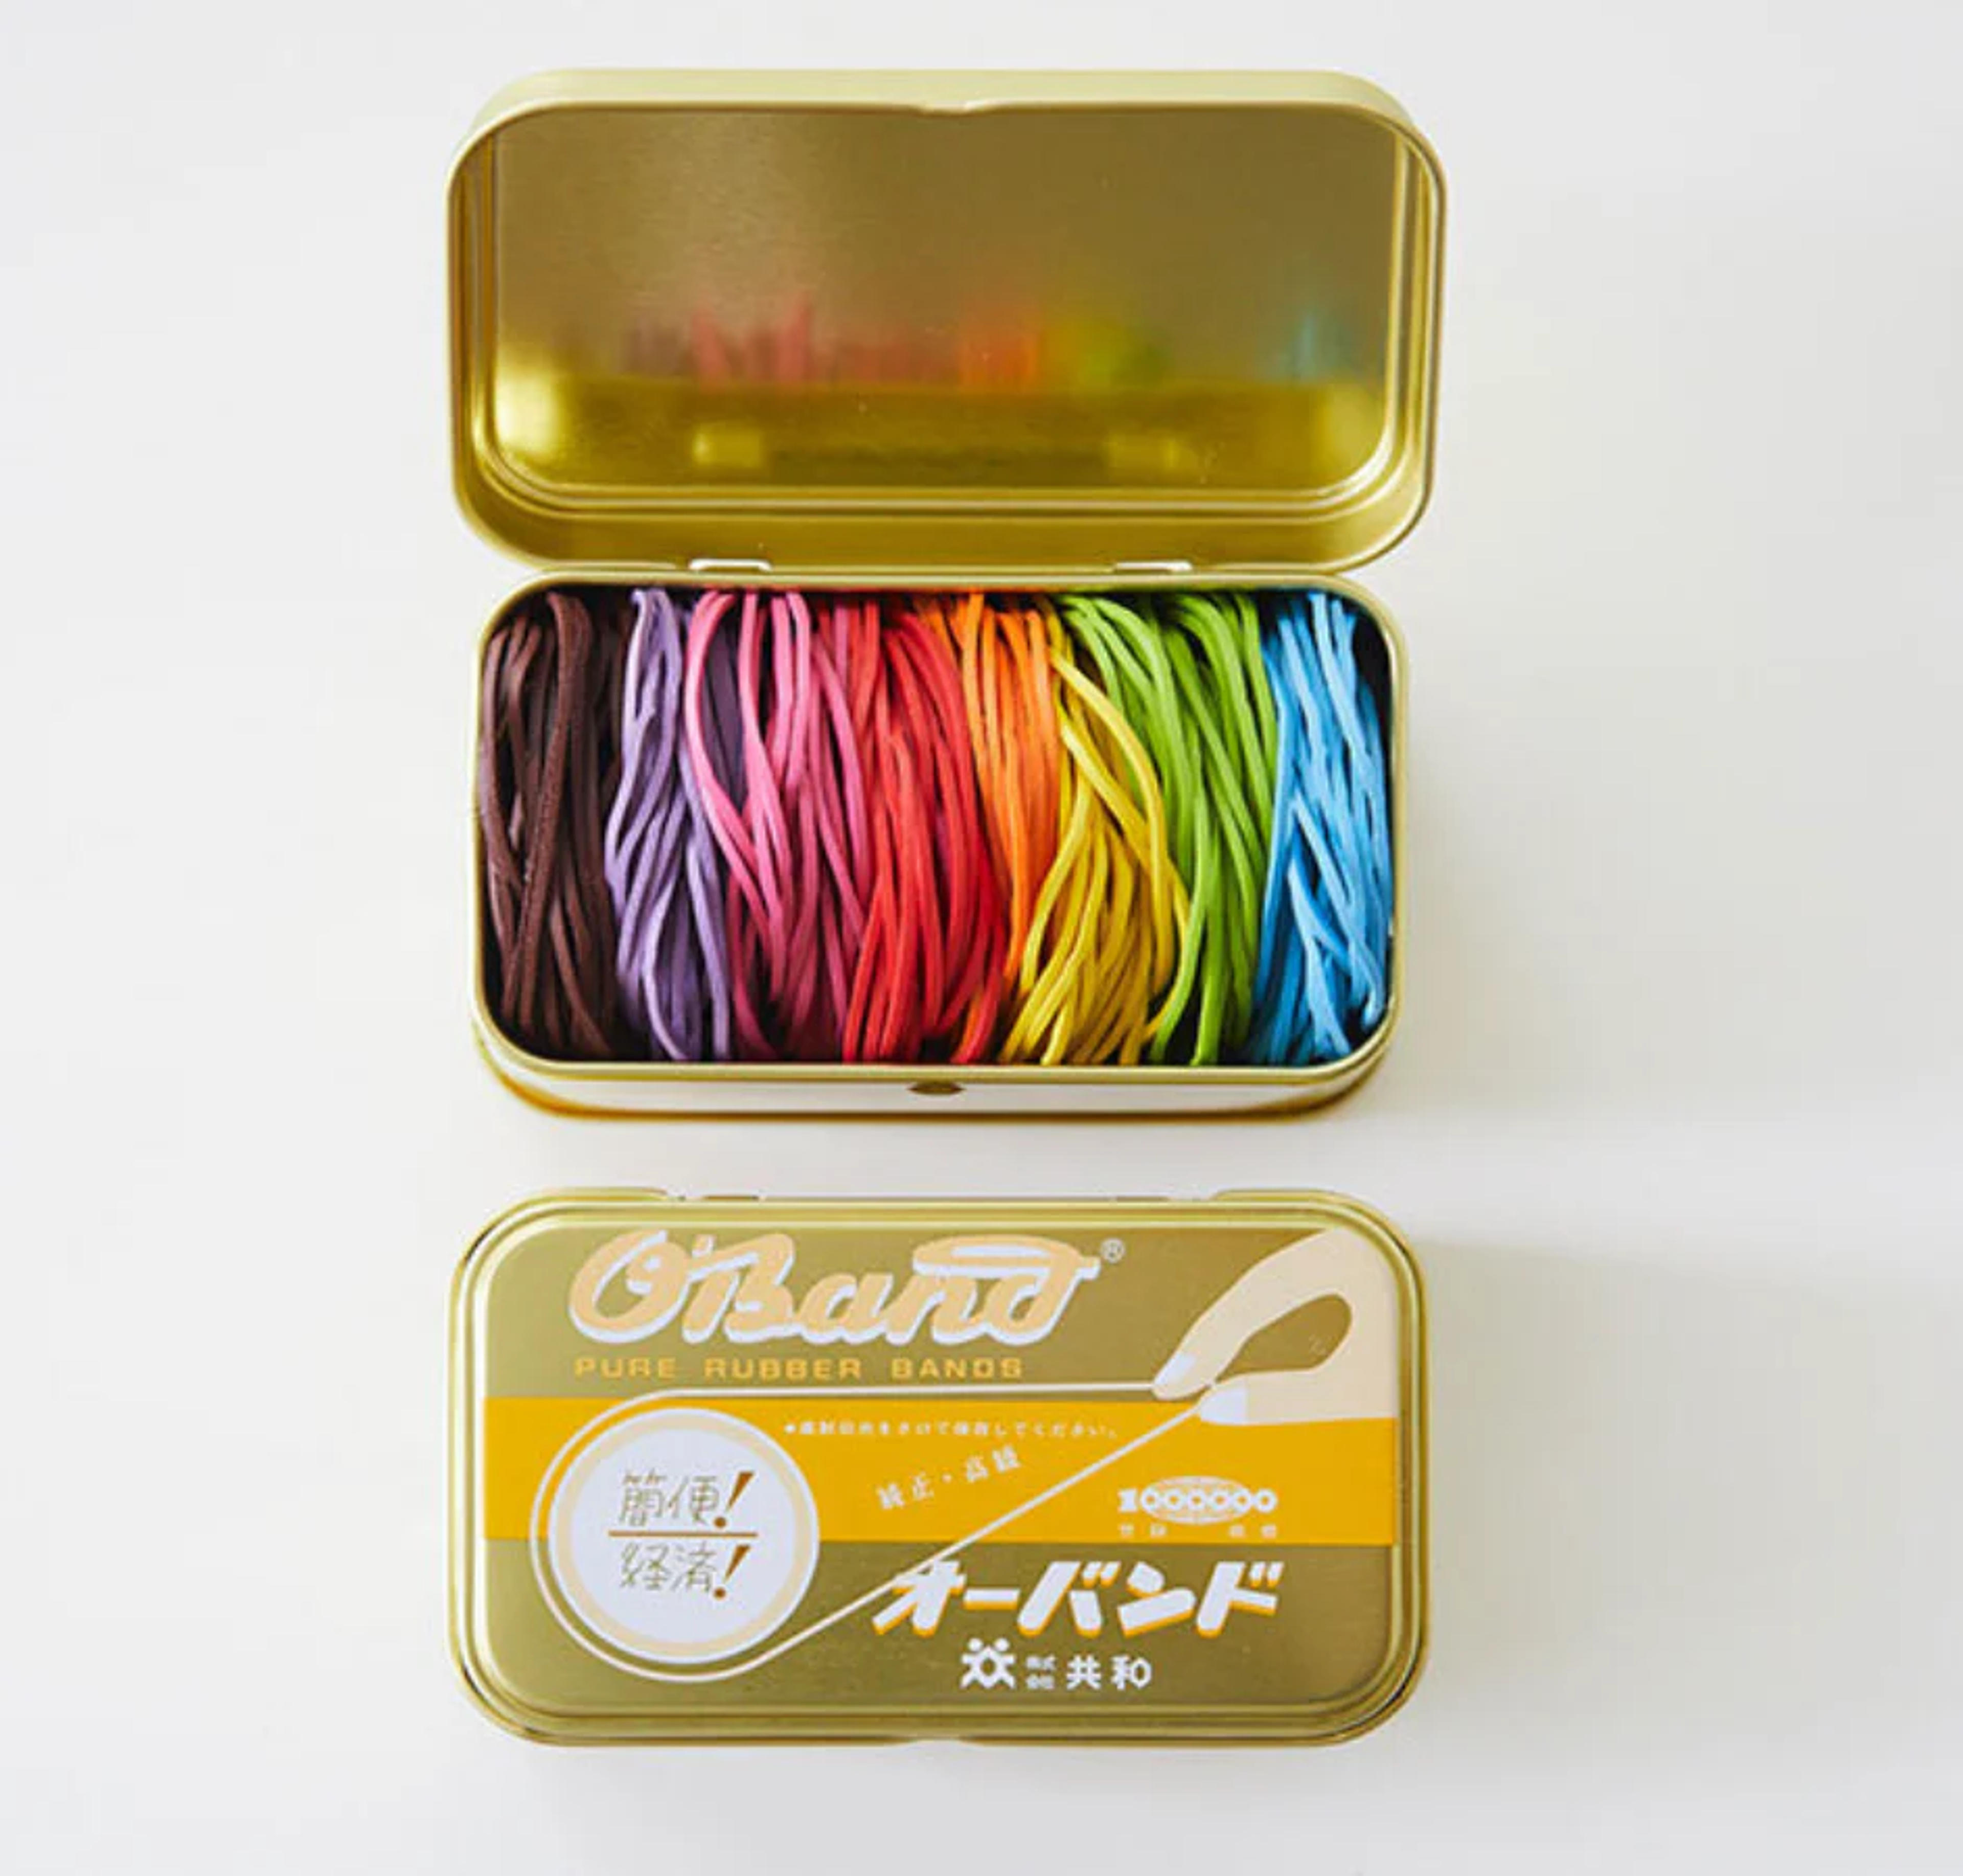 Box of Japanese Rubber Bands - 2 color options